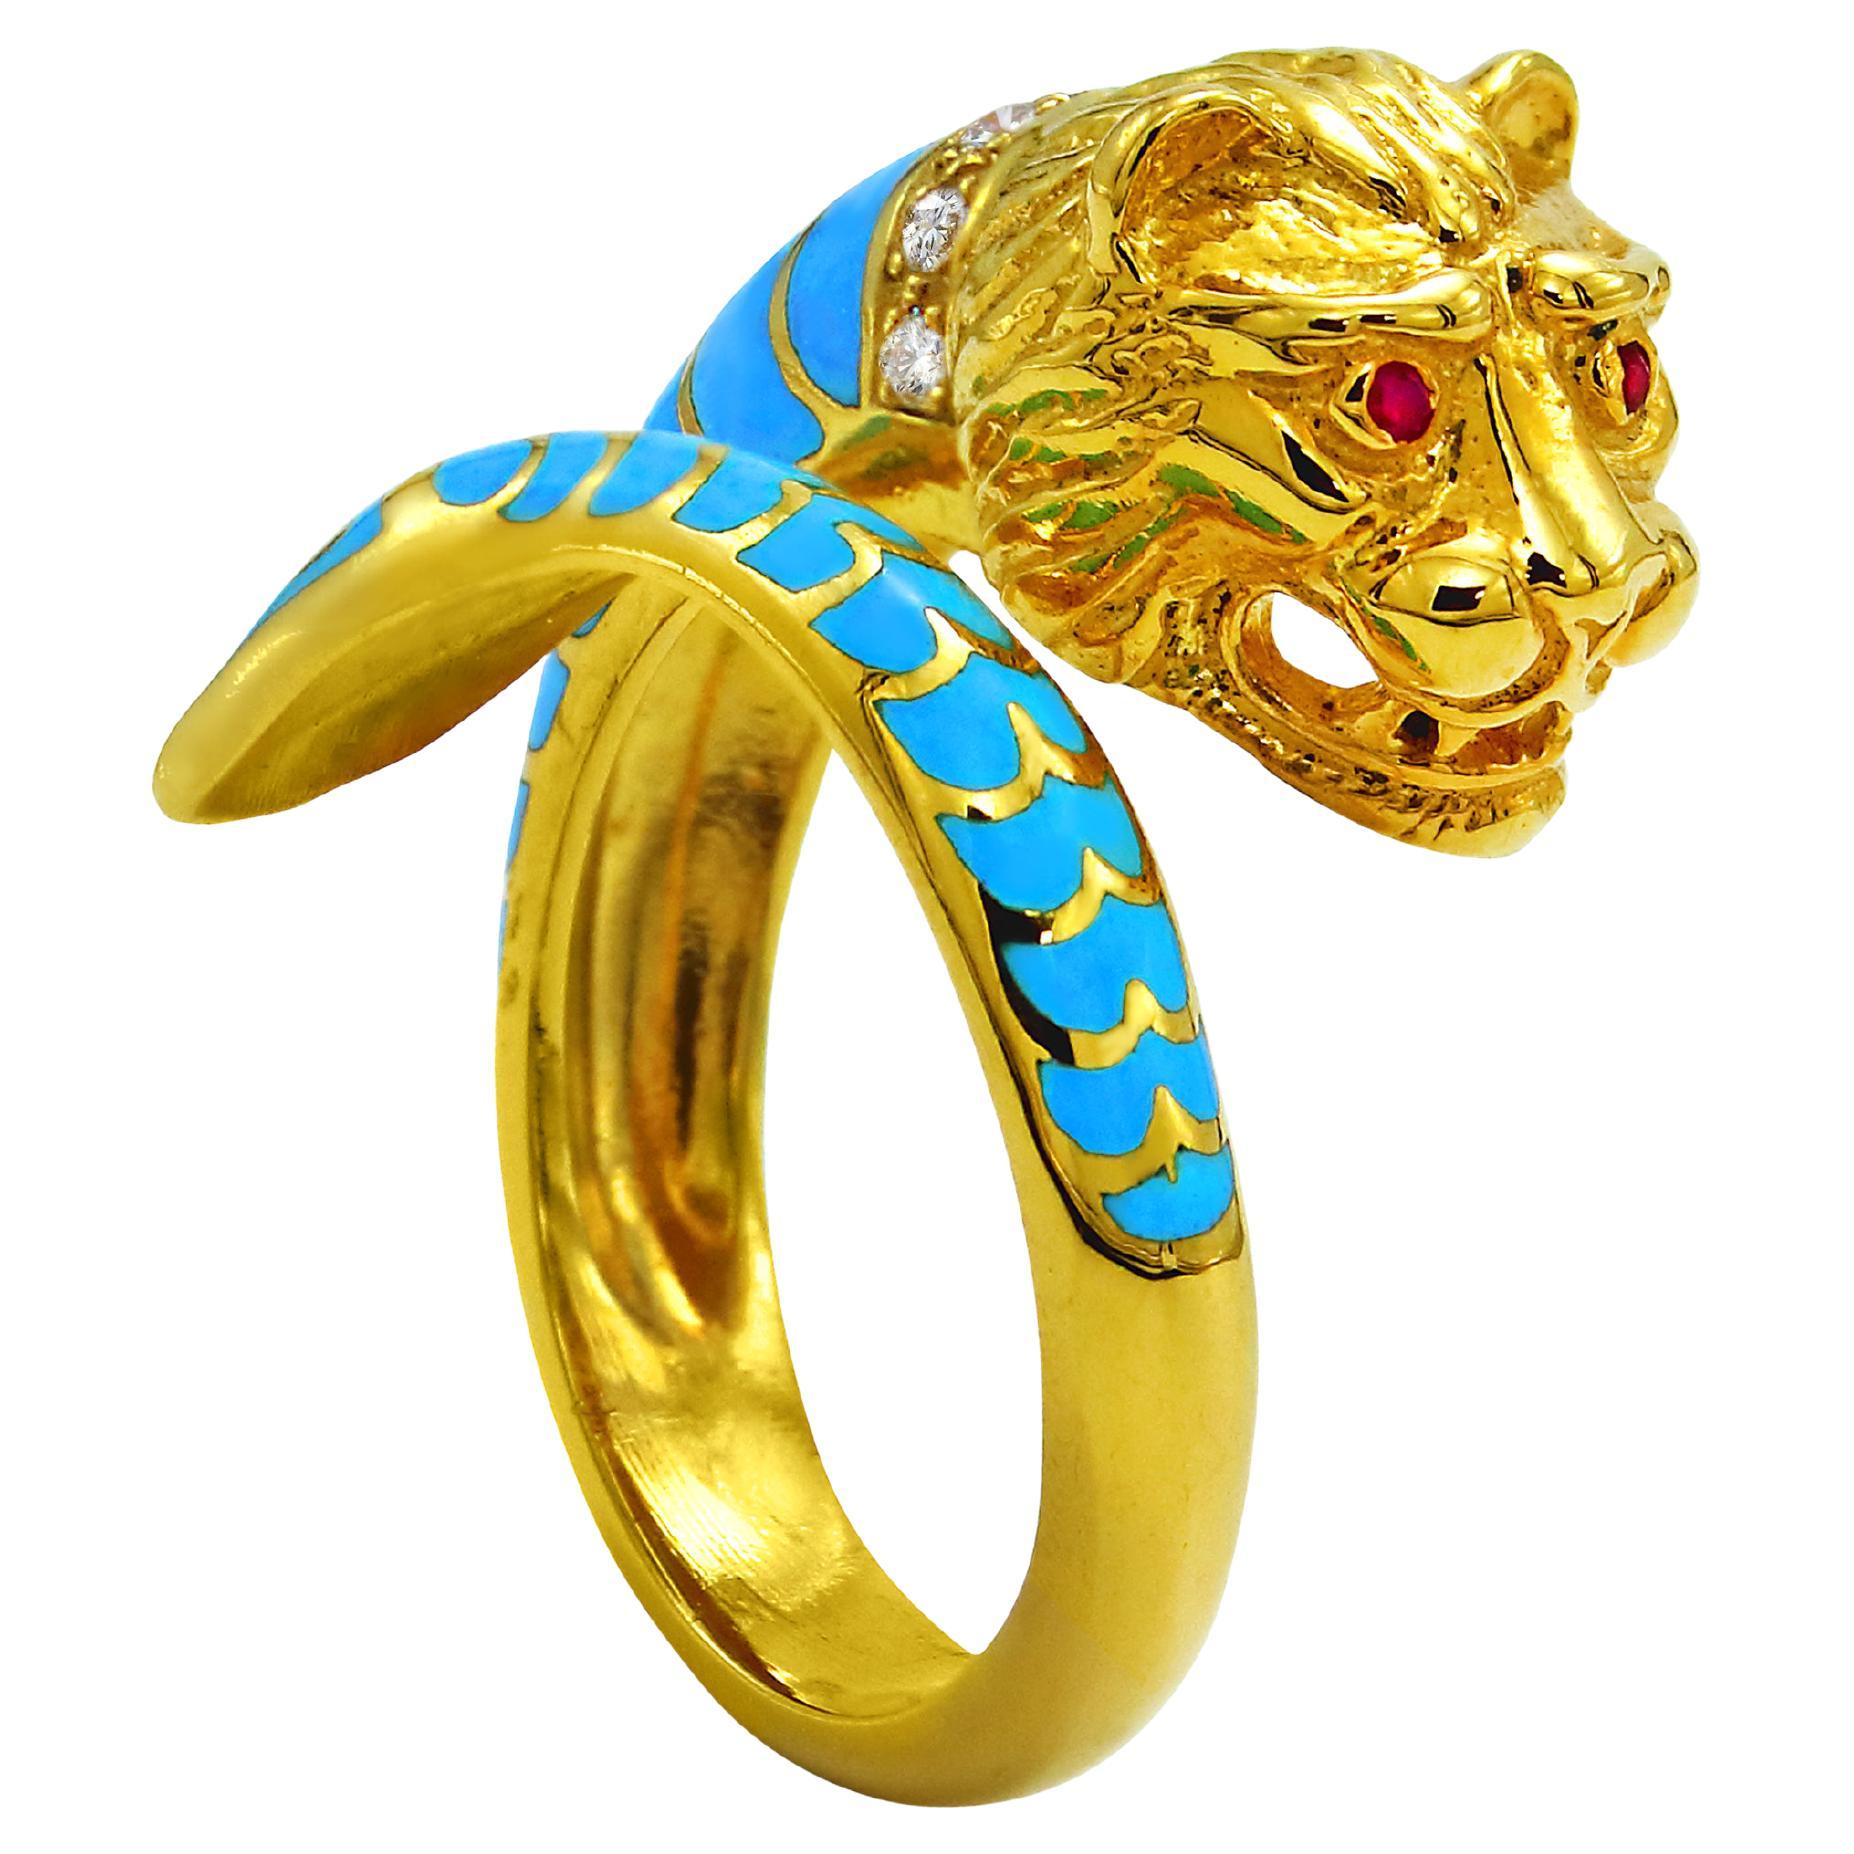 Dimos 18k Gold Lion Ring with Rubies and Diamonds For Sale